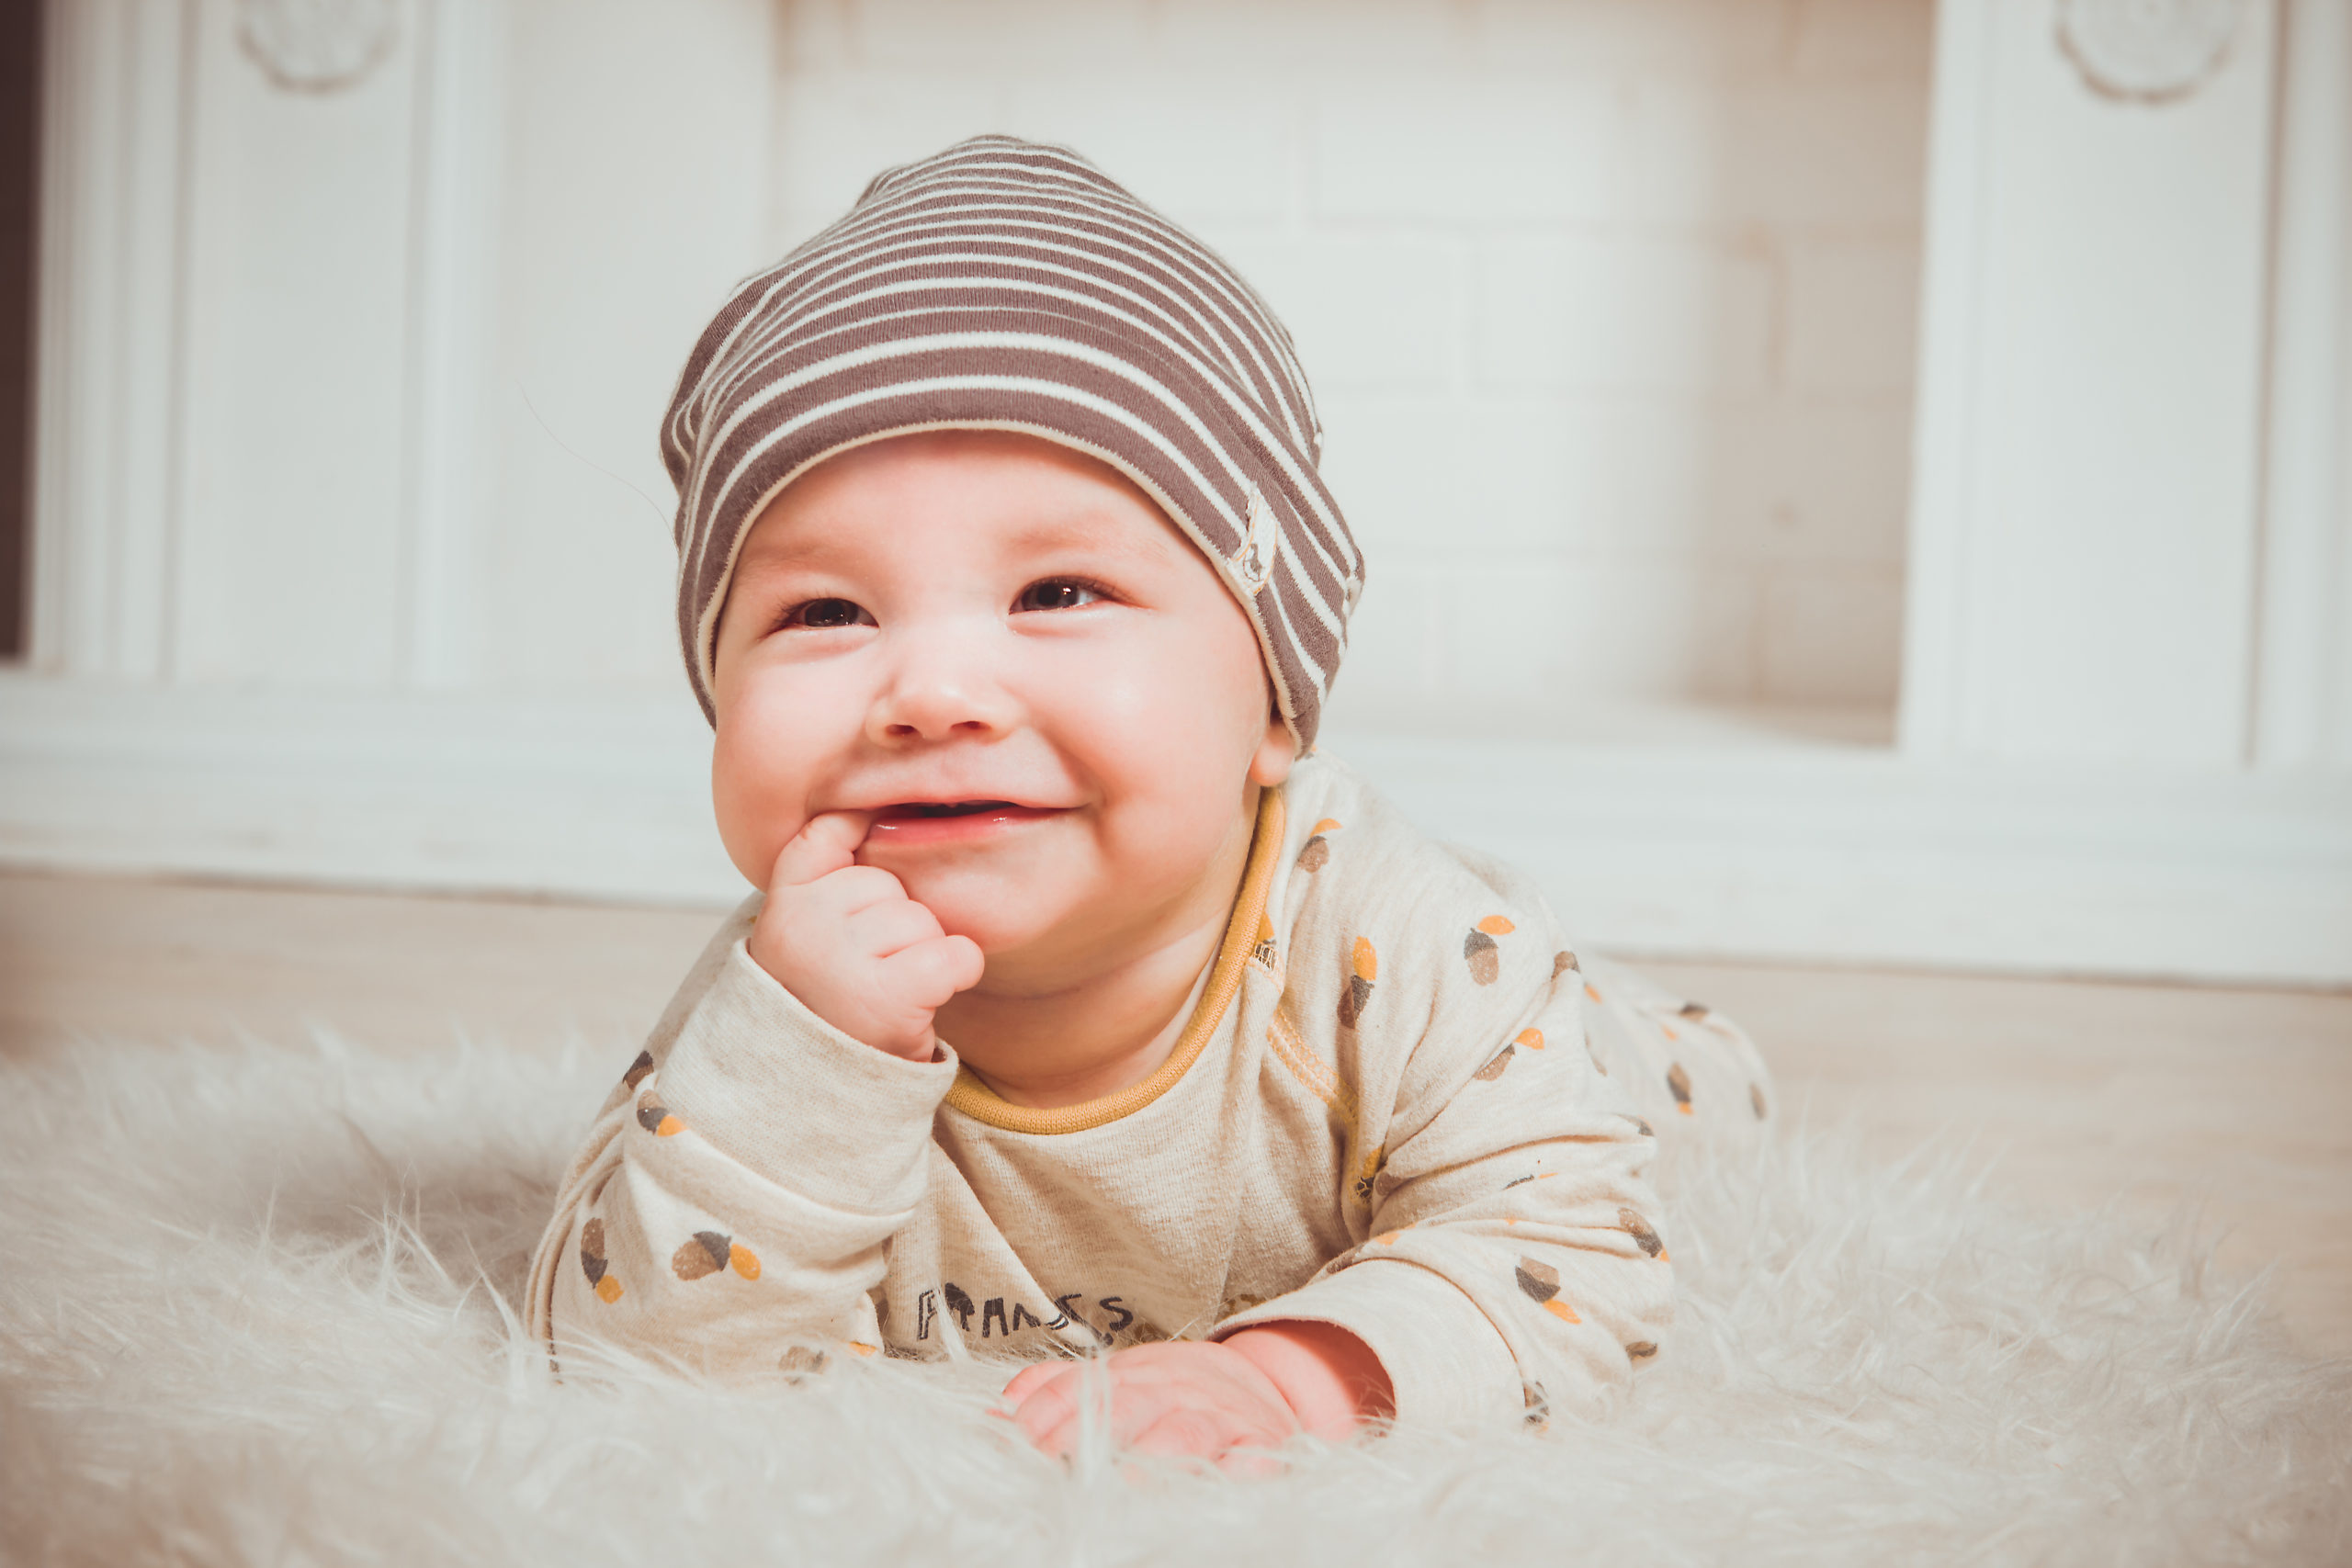 Tips to Make Your Baby Comfortable While Teething